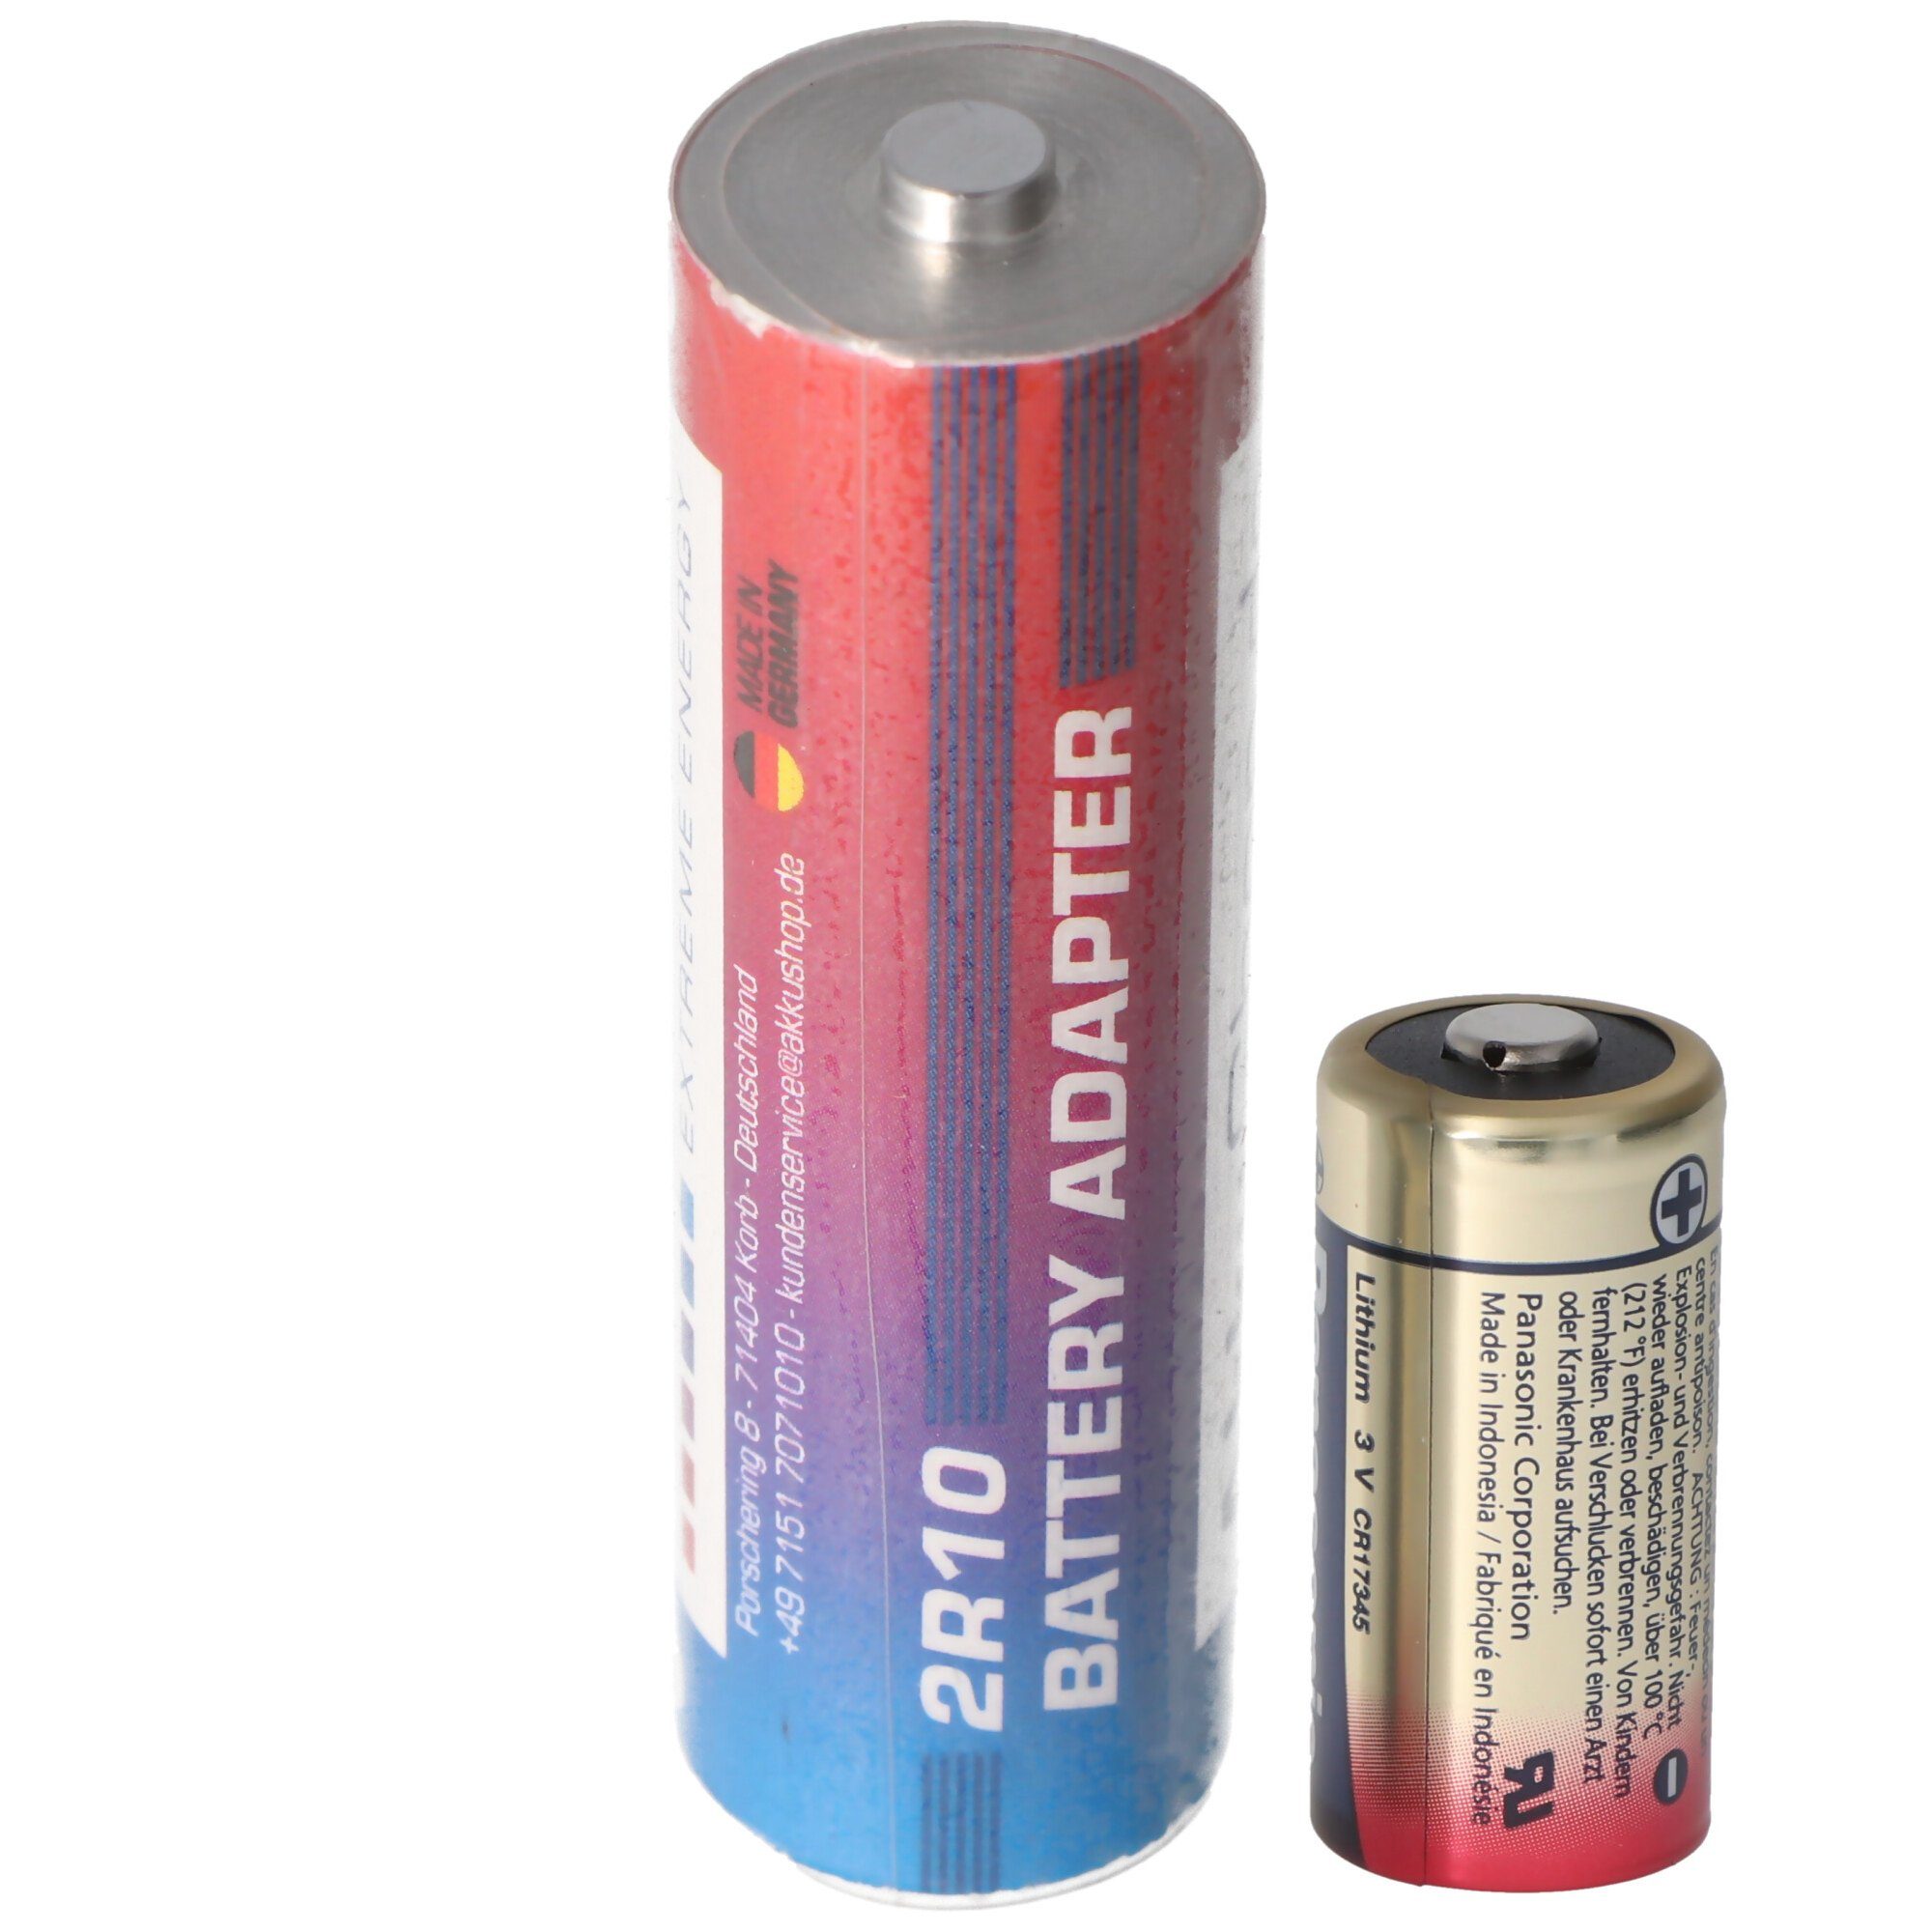 2R10R, 2010, Batterie Stab-Batterie, AccuCell Vo 3010, Batterie 3,0 Duplex 2R10 Adapter